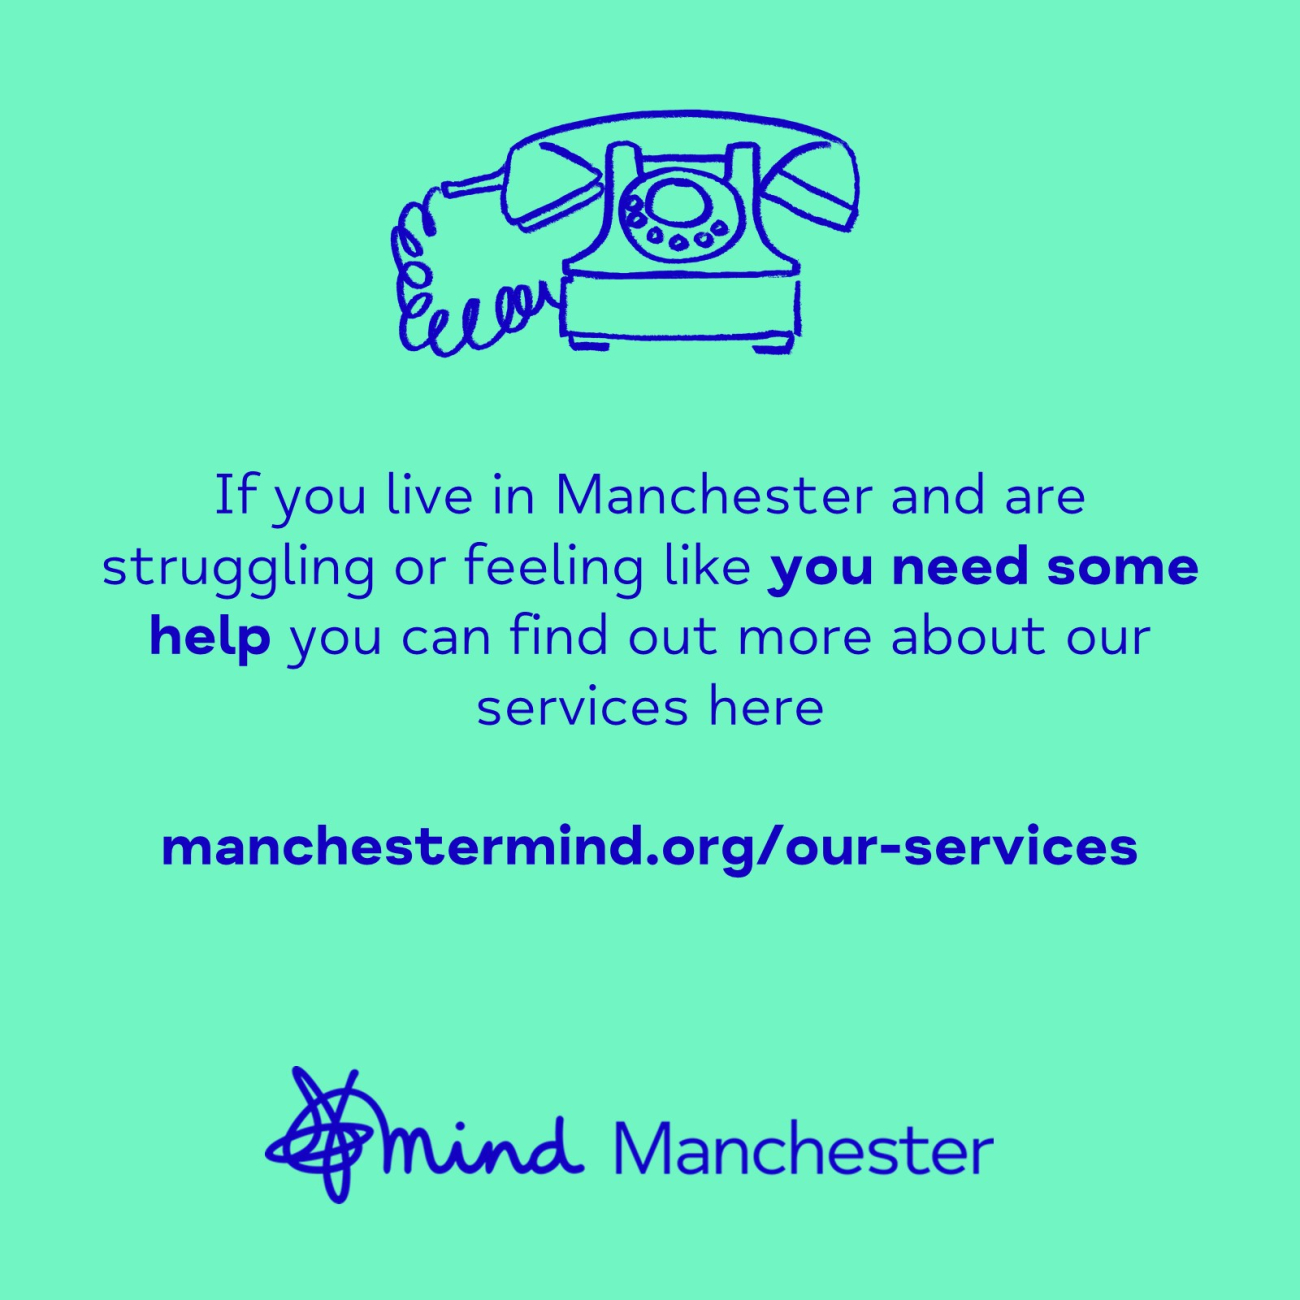 If you live in Manchester and are struggling or feeling like you need some help you can find out more about our services here manchesterming.org/our-services